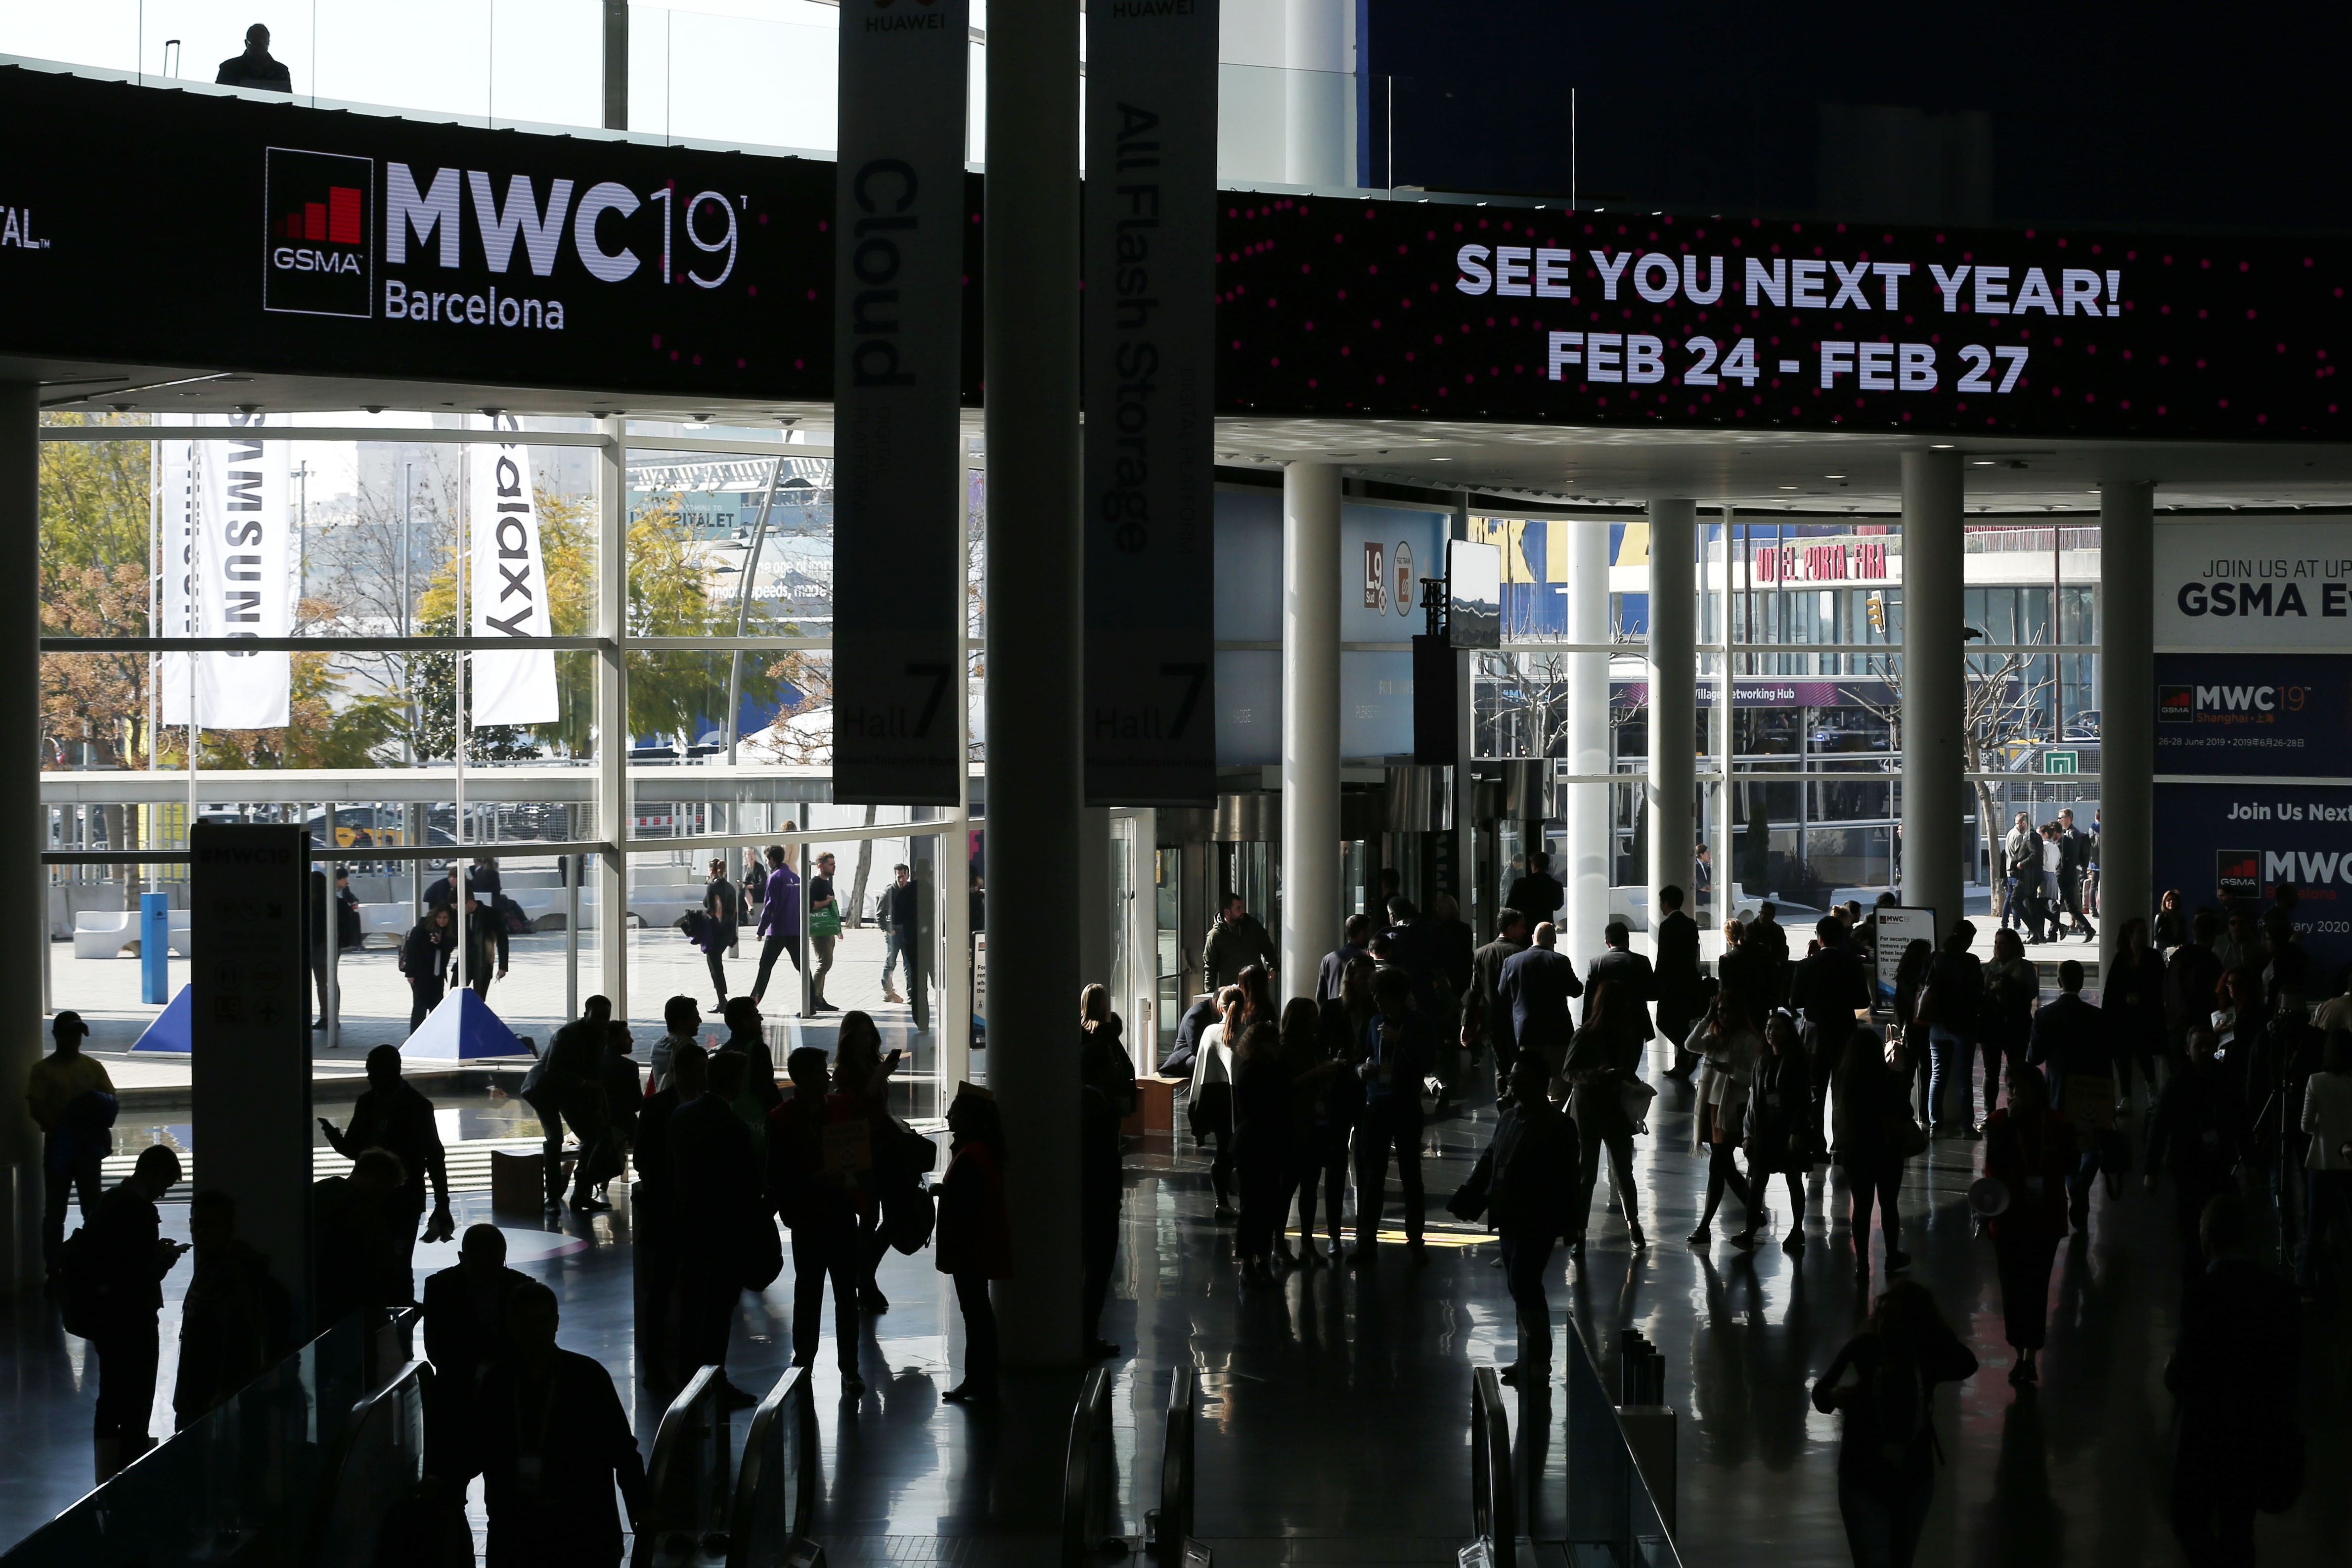 Attendees leave the MWC Barcelona venue on February 28, 2019. Photo: Agence France-Presse